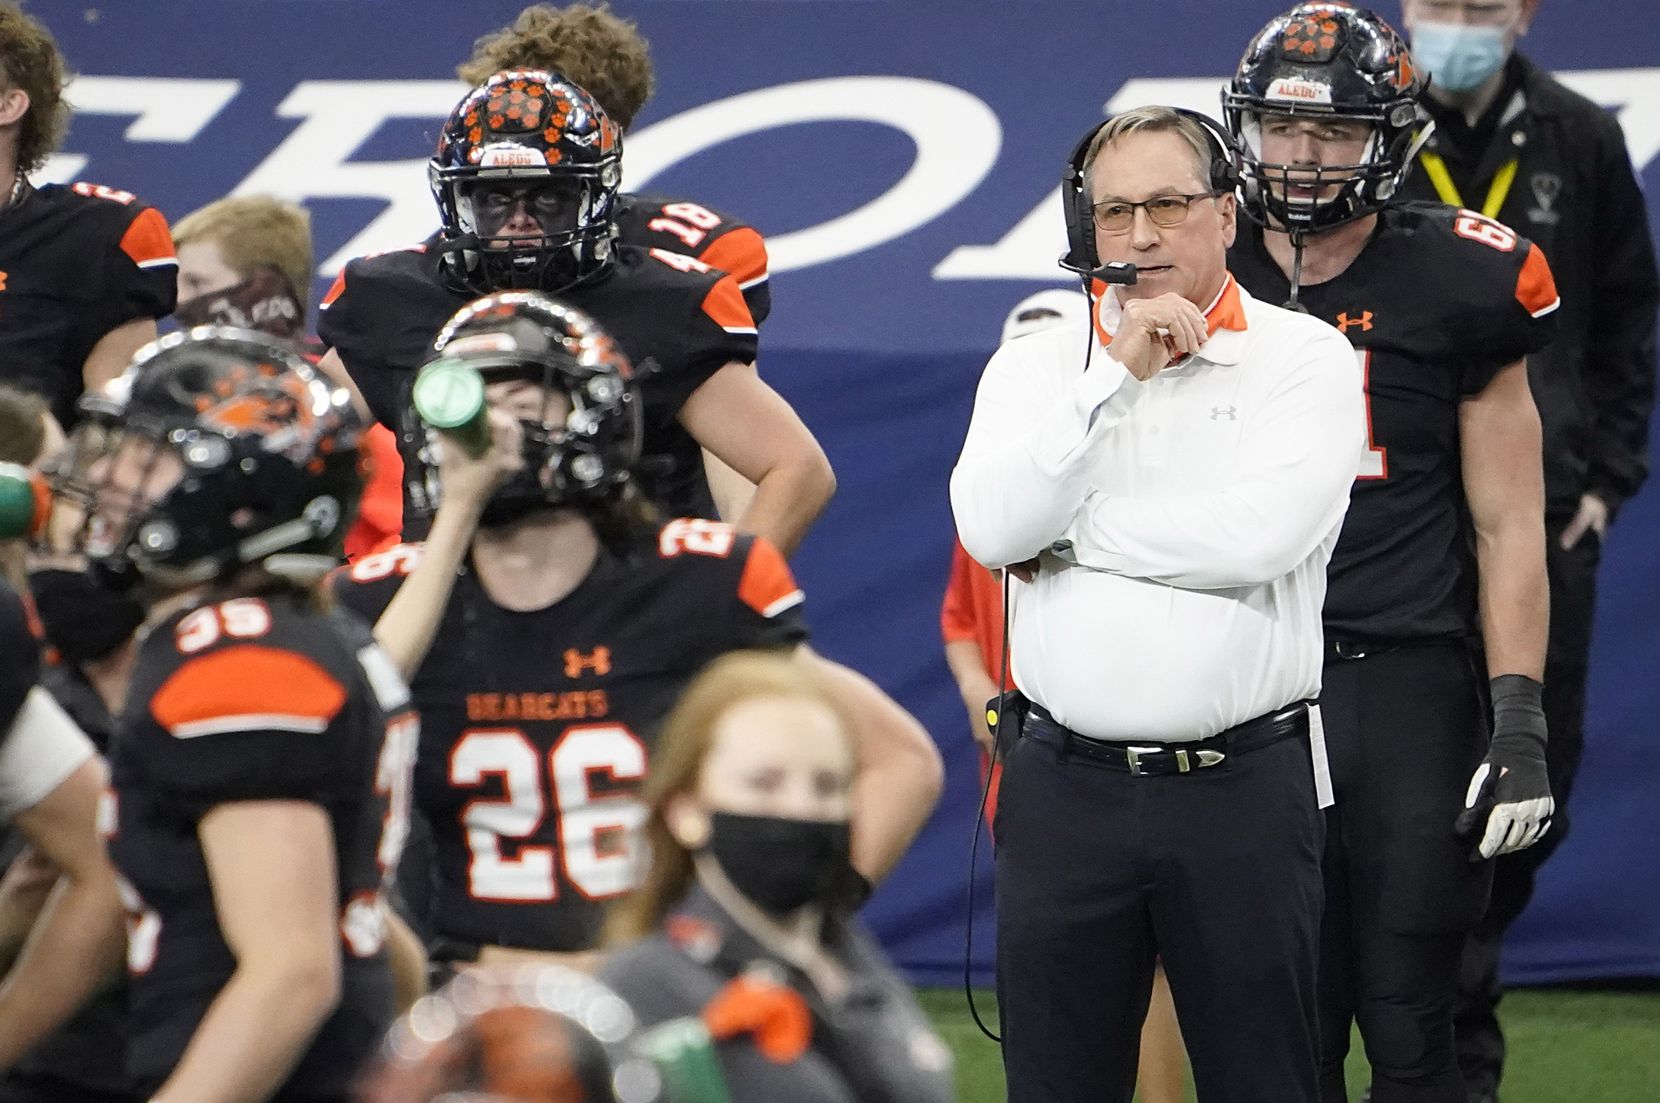 Aledo head coach Tim Buchanan works on the sidelines during the first half of the Class 5A Division II state football championship game against Crosby at AT&T Stadium on Friday, Jan. 15, 2021, in Arlington. (Smiley N. Pool/The Dallas Morning News)